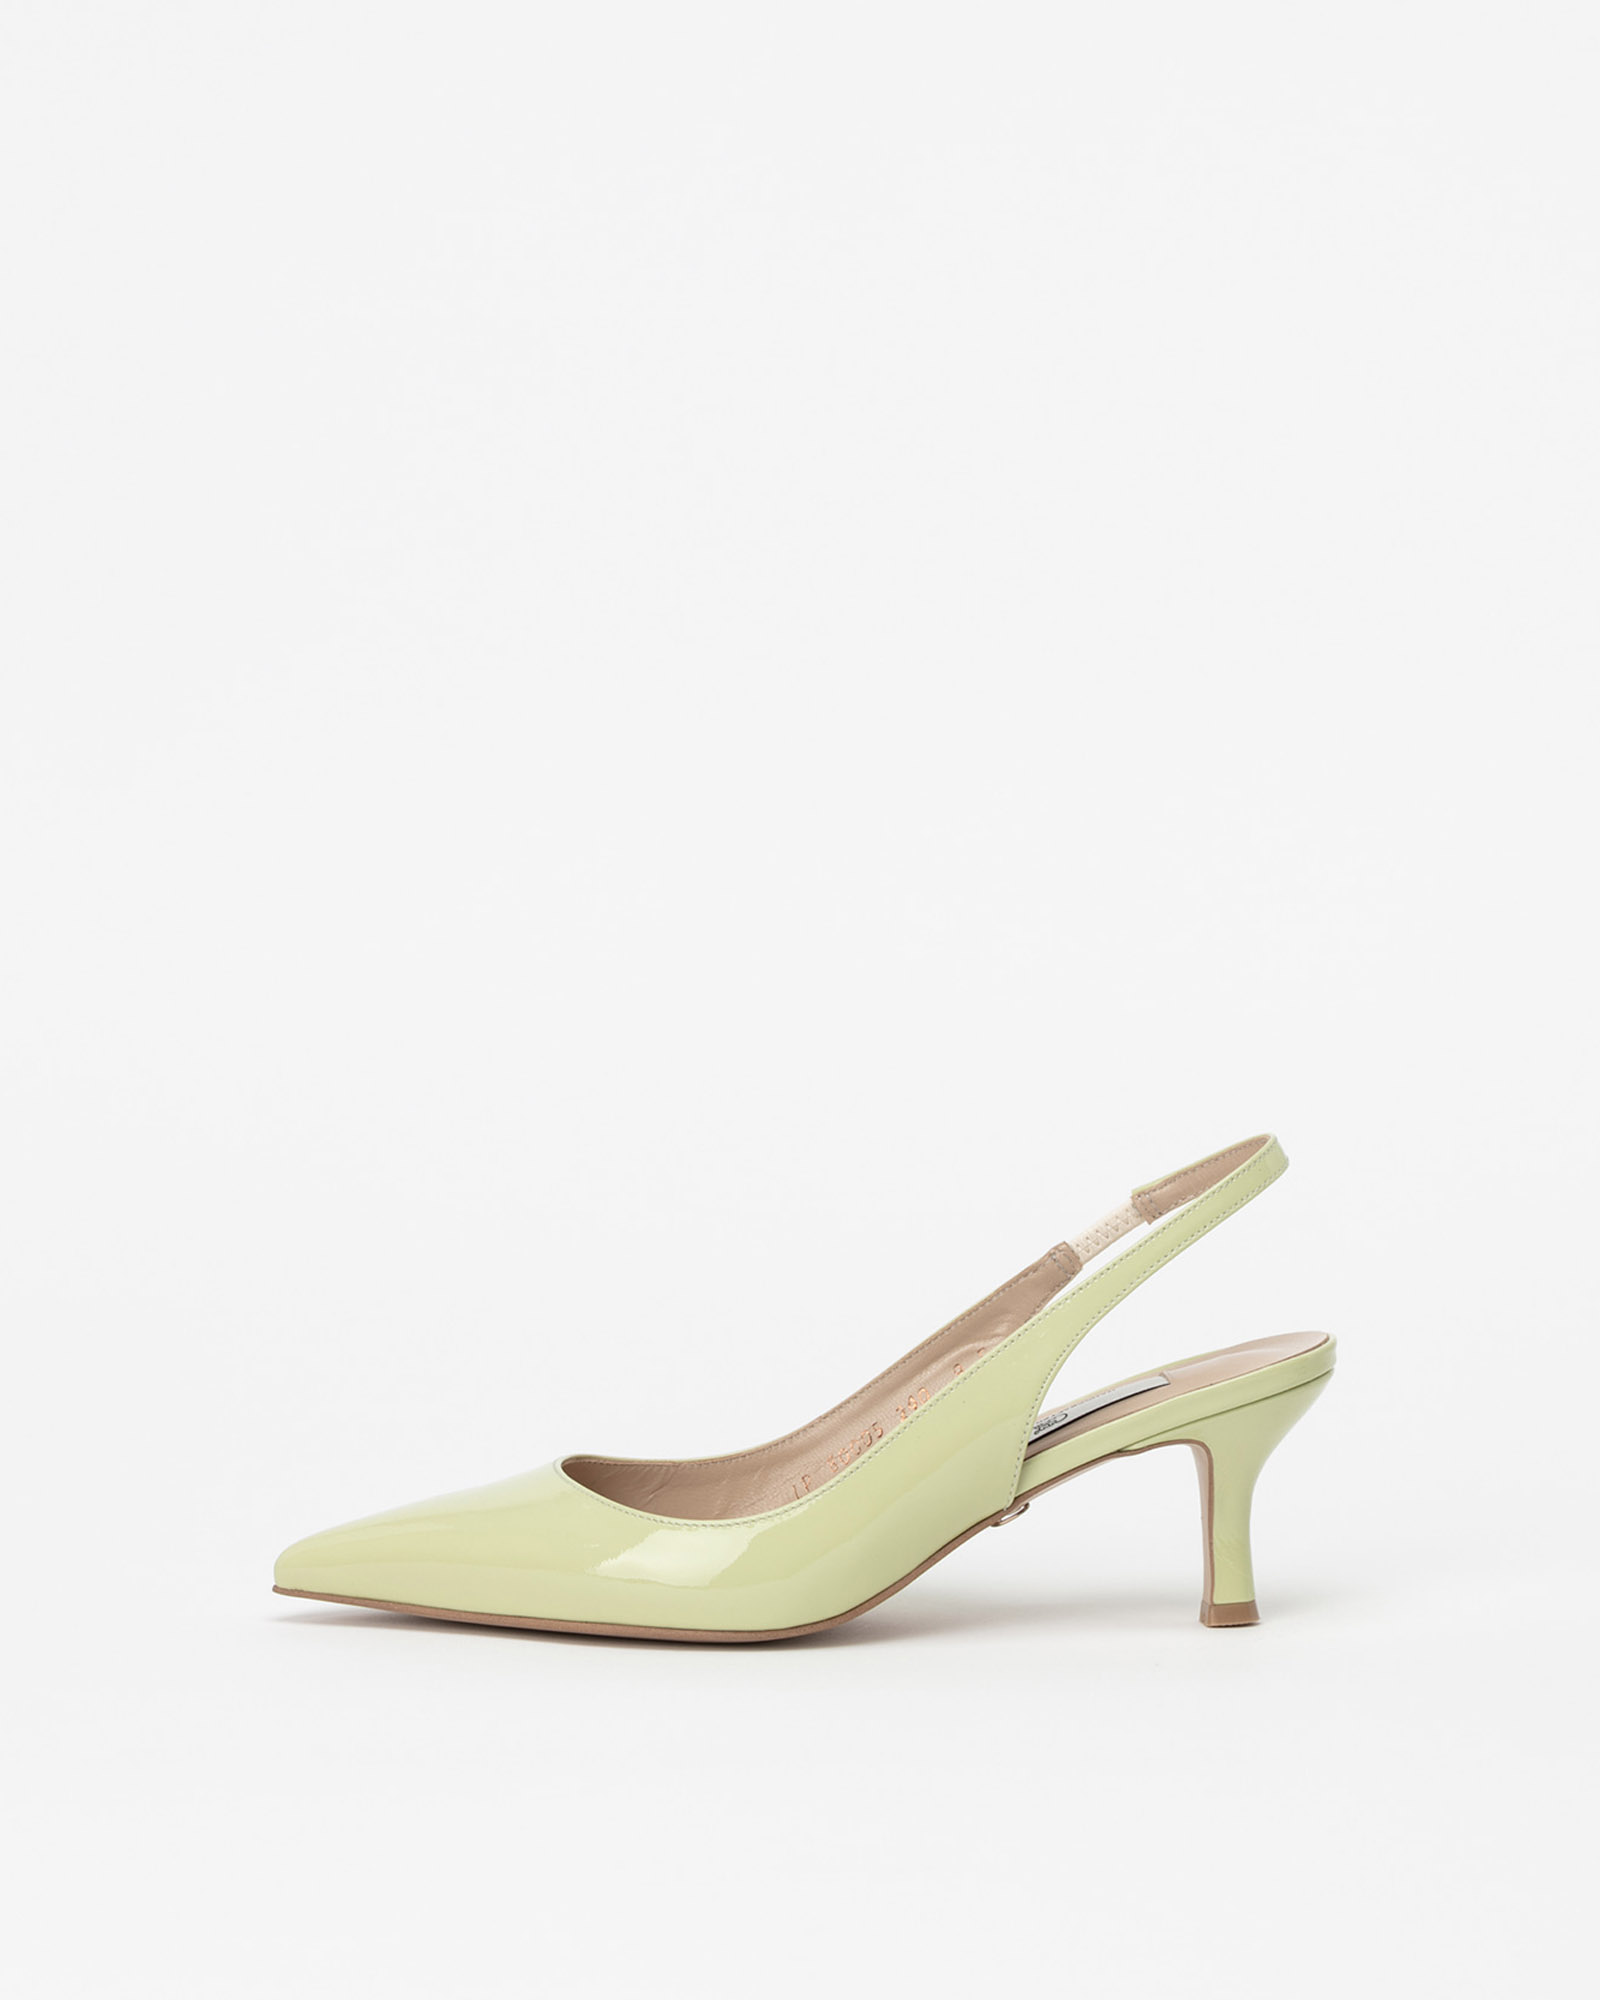 Felicity Slingbacks in Shadow Lime Patent